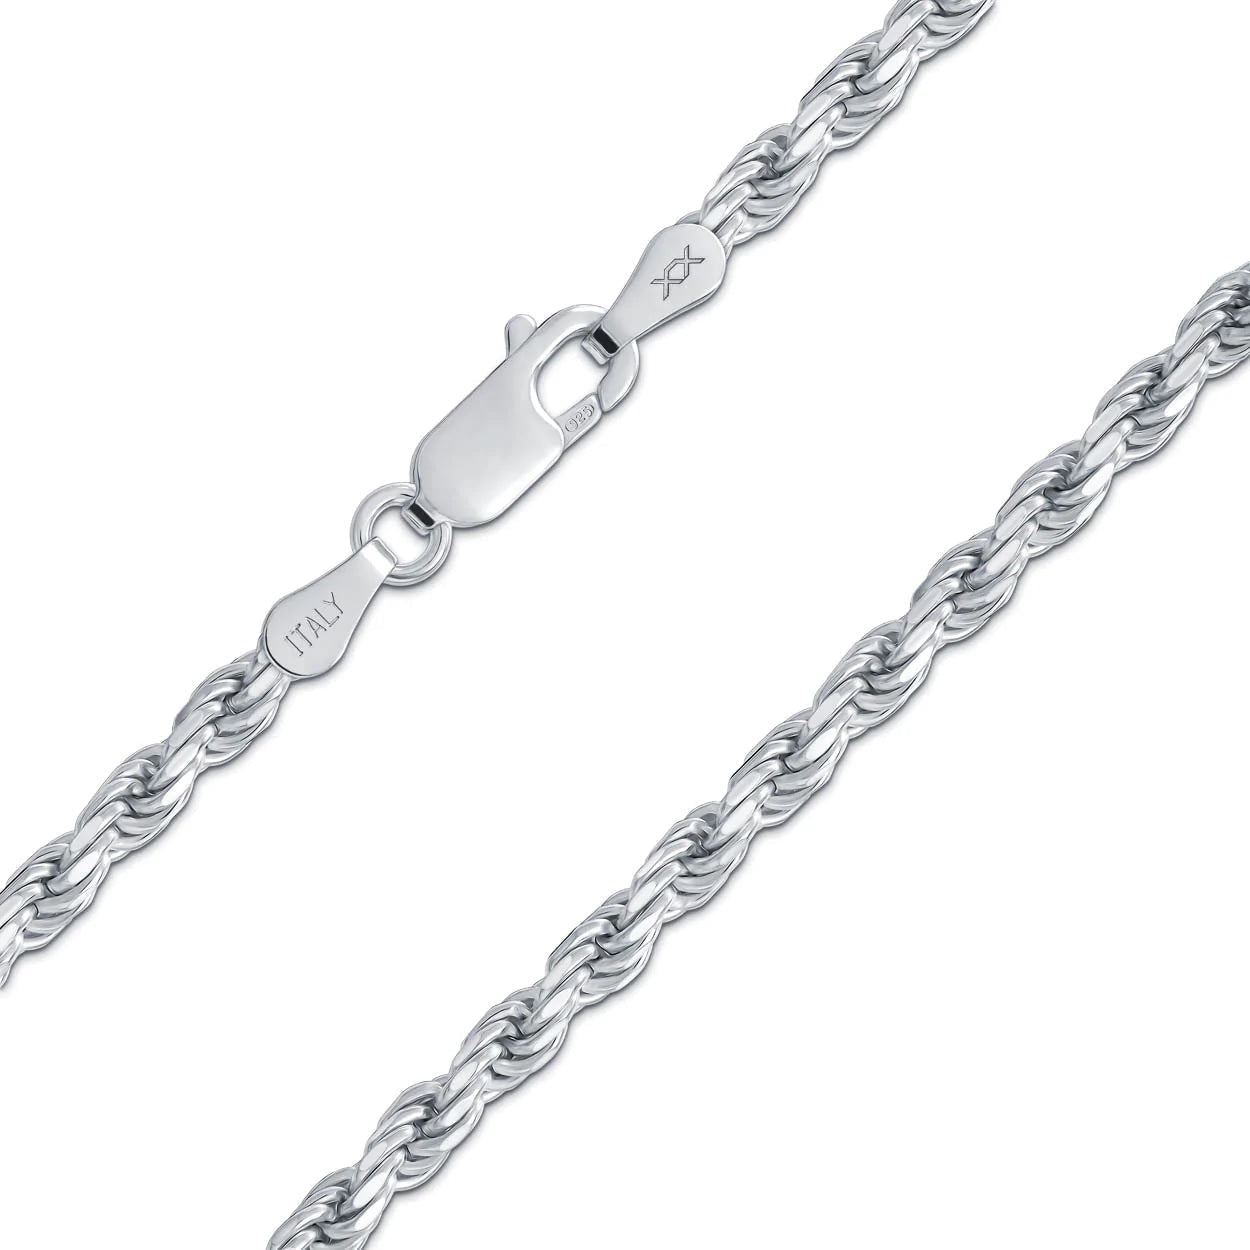 Better Jewelry 5.7mm Rope Diamond cut Chain Necklace .925 Sterling Silver w. Rhodium plate